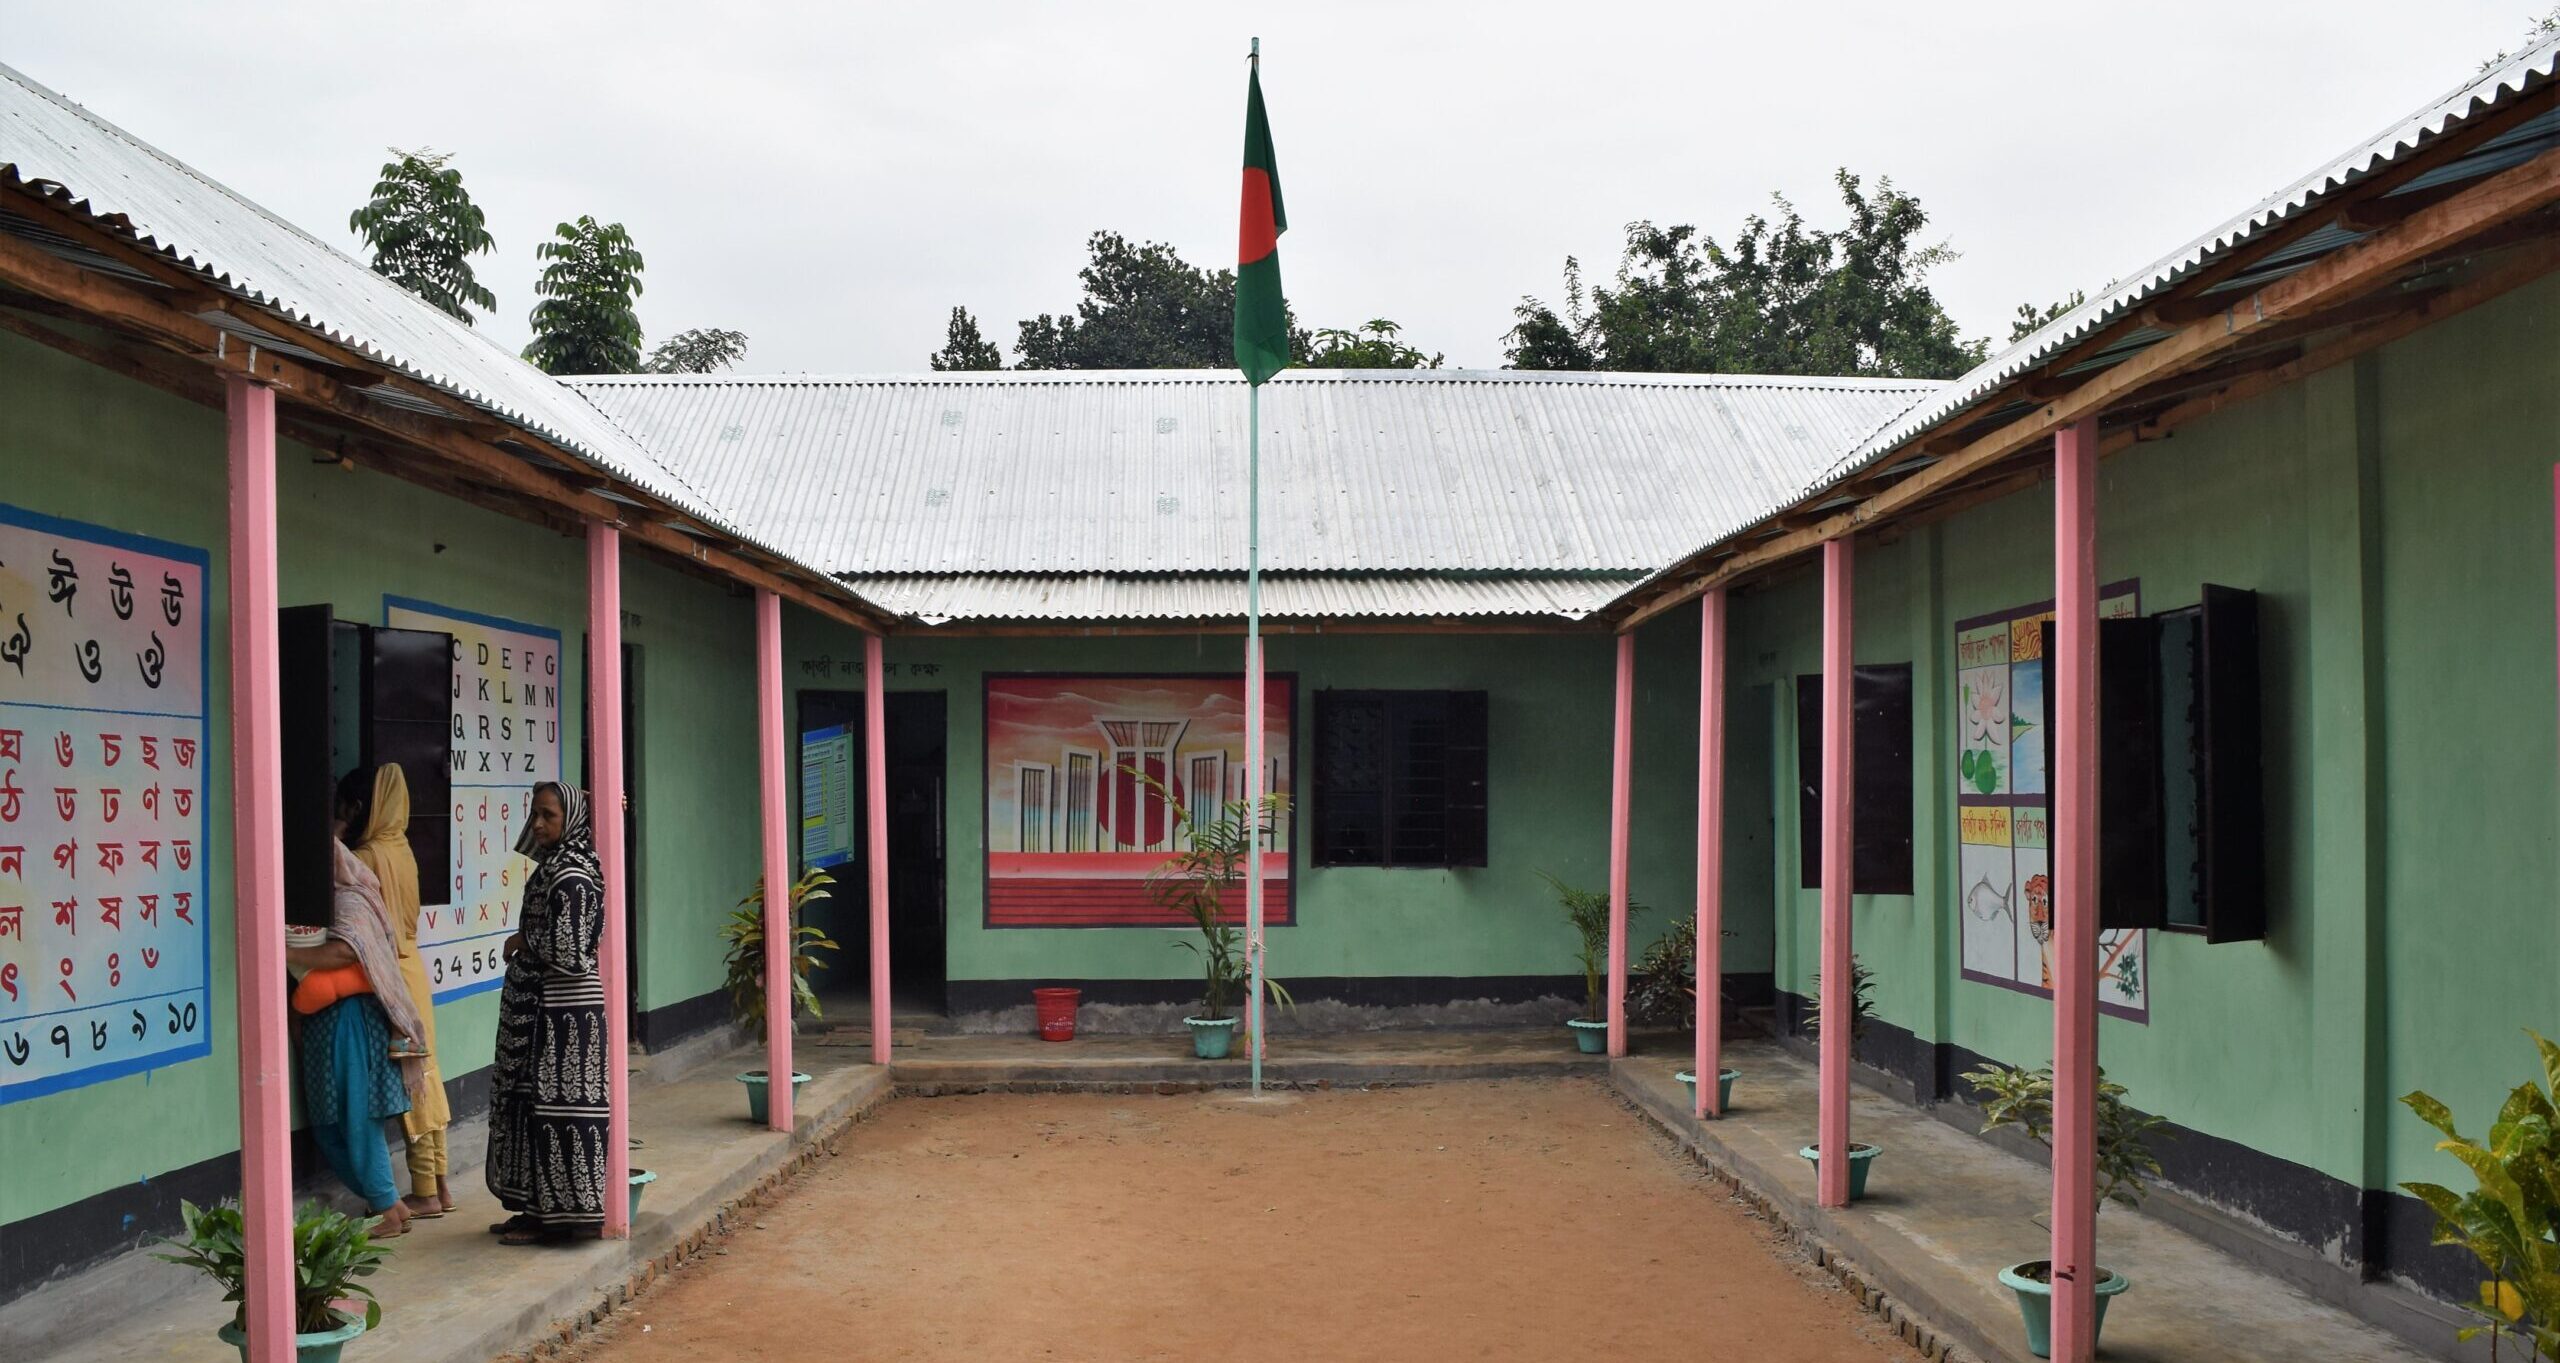 An image of a courtyard at a school in Bangladesh